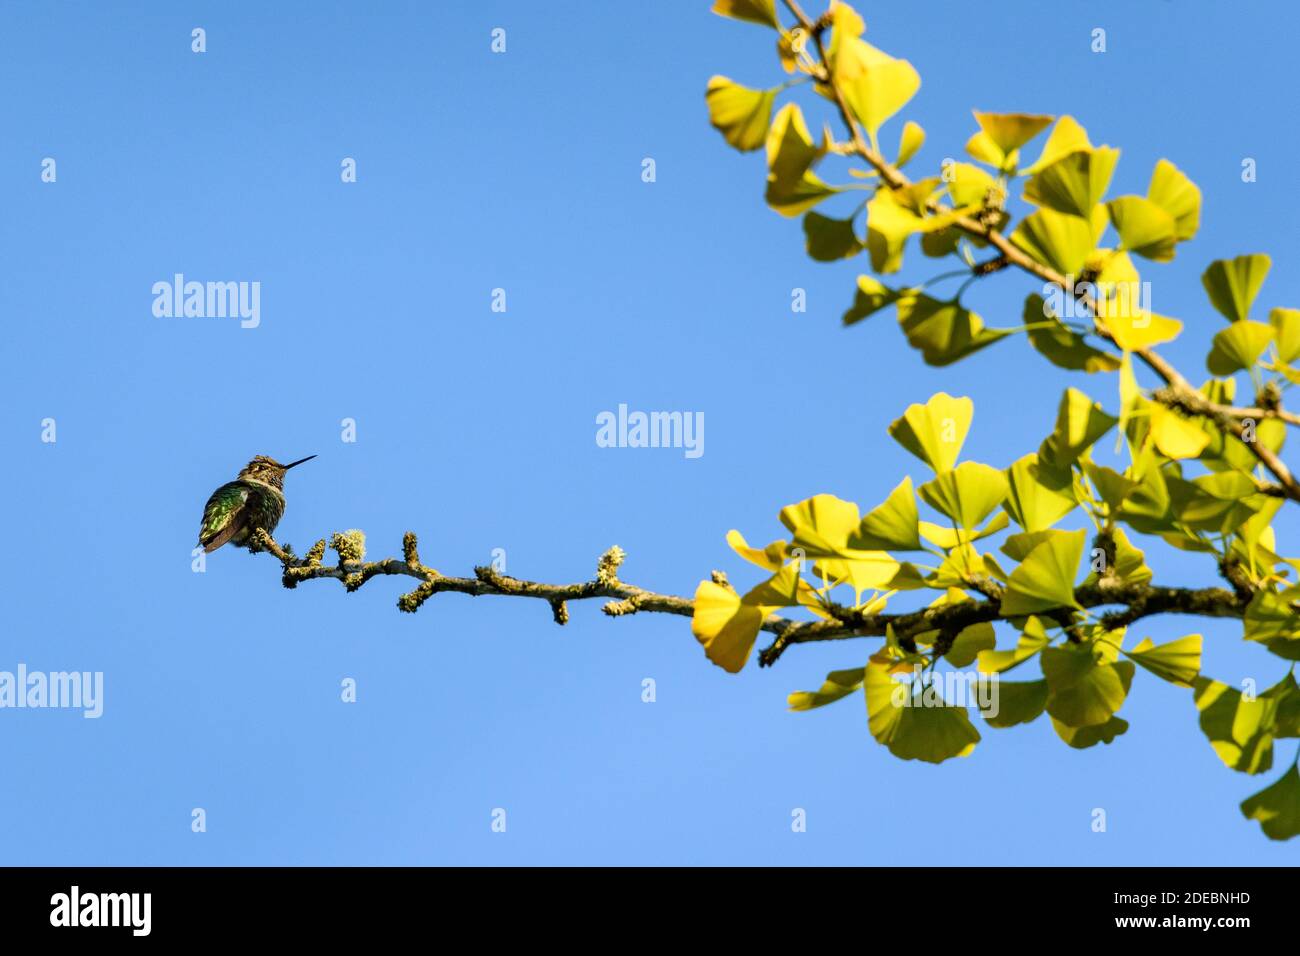 Hummingbird perched on the end of a Ginkgo Biloba tree branch against a blue sky Stock Photo